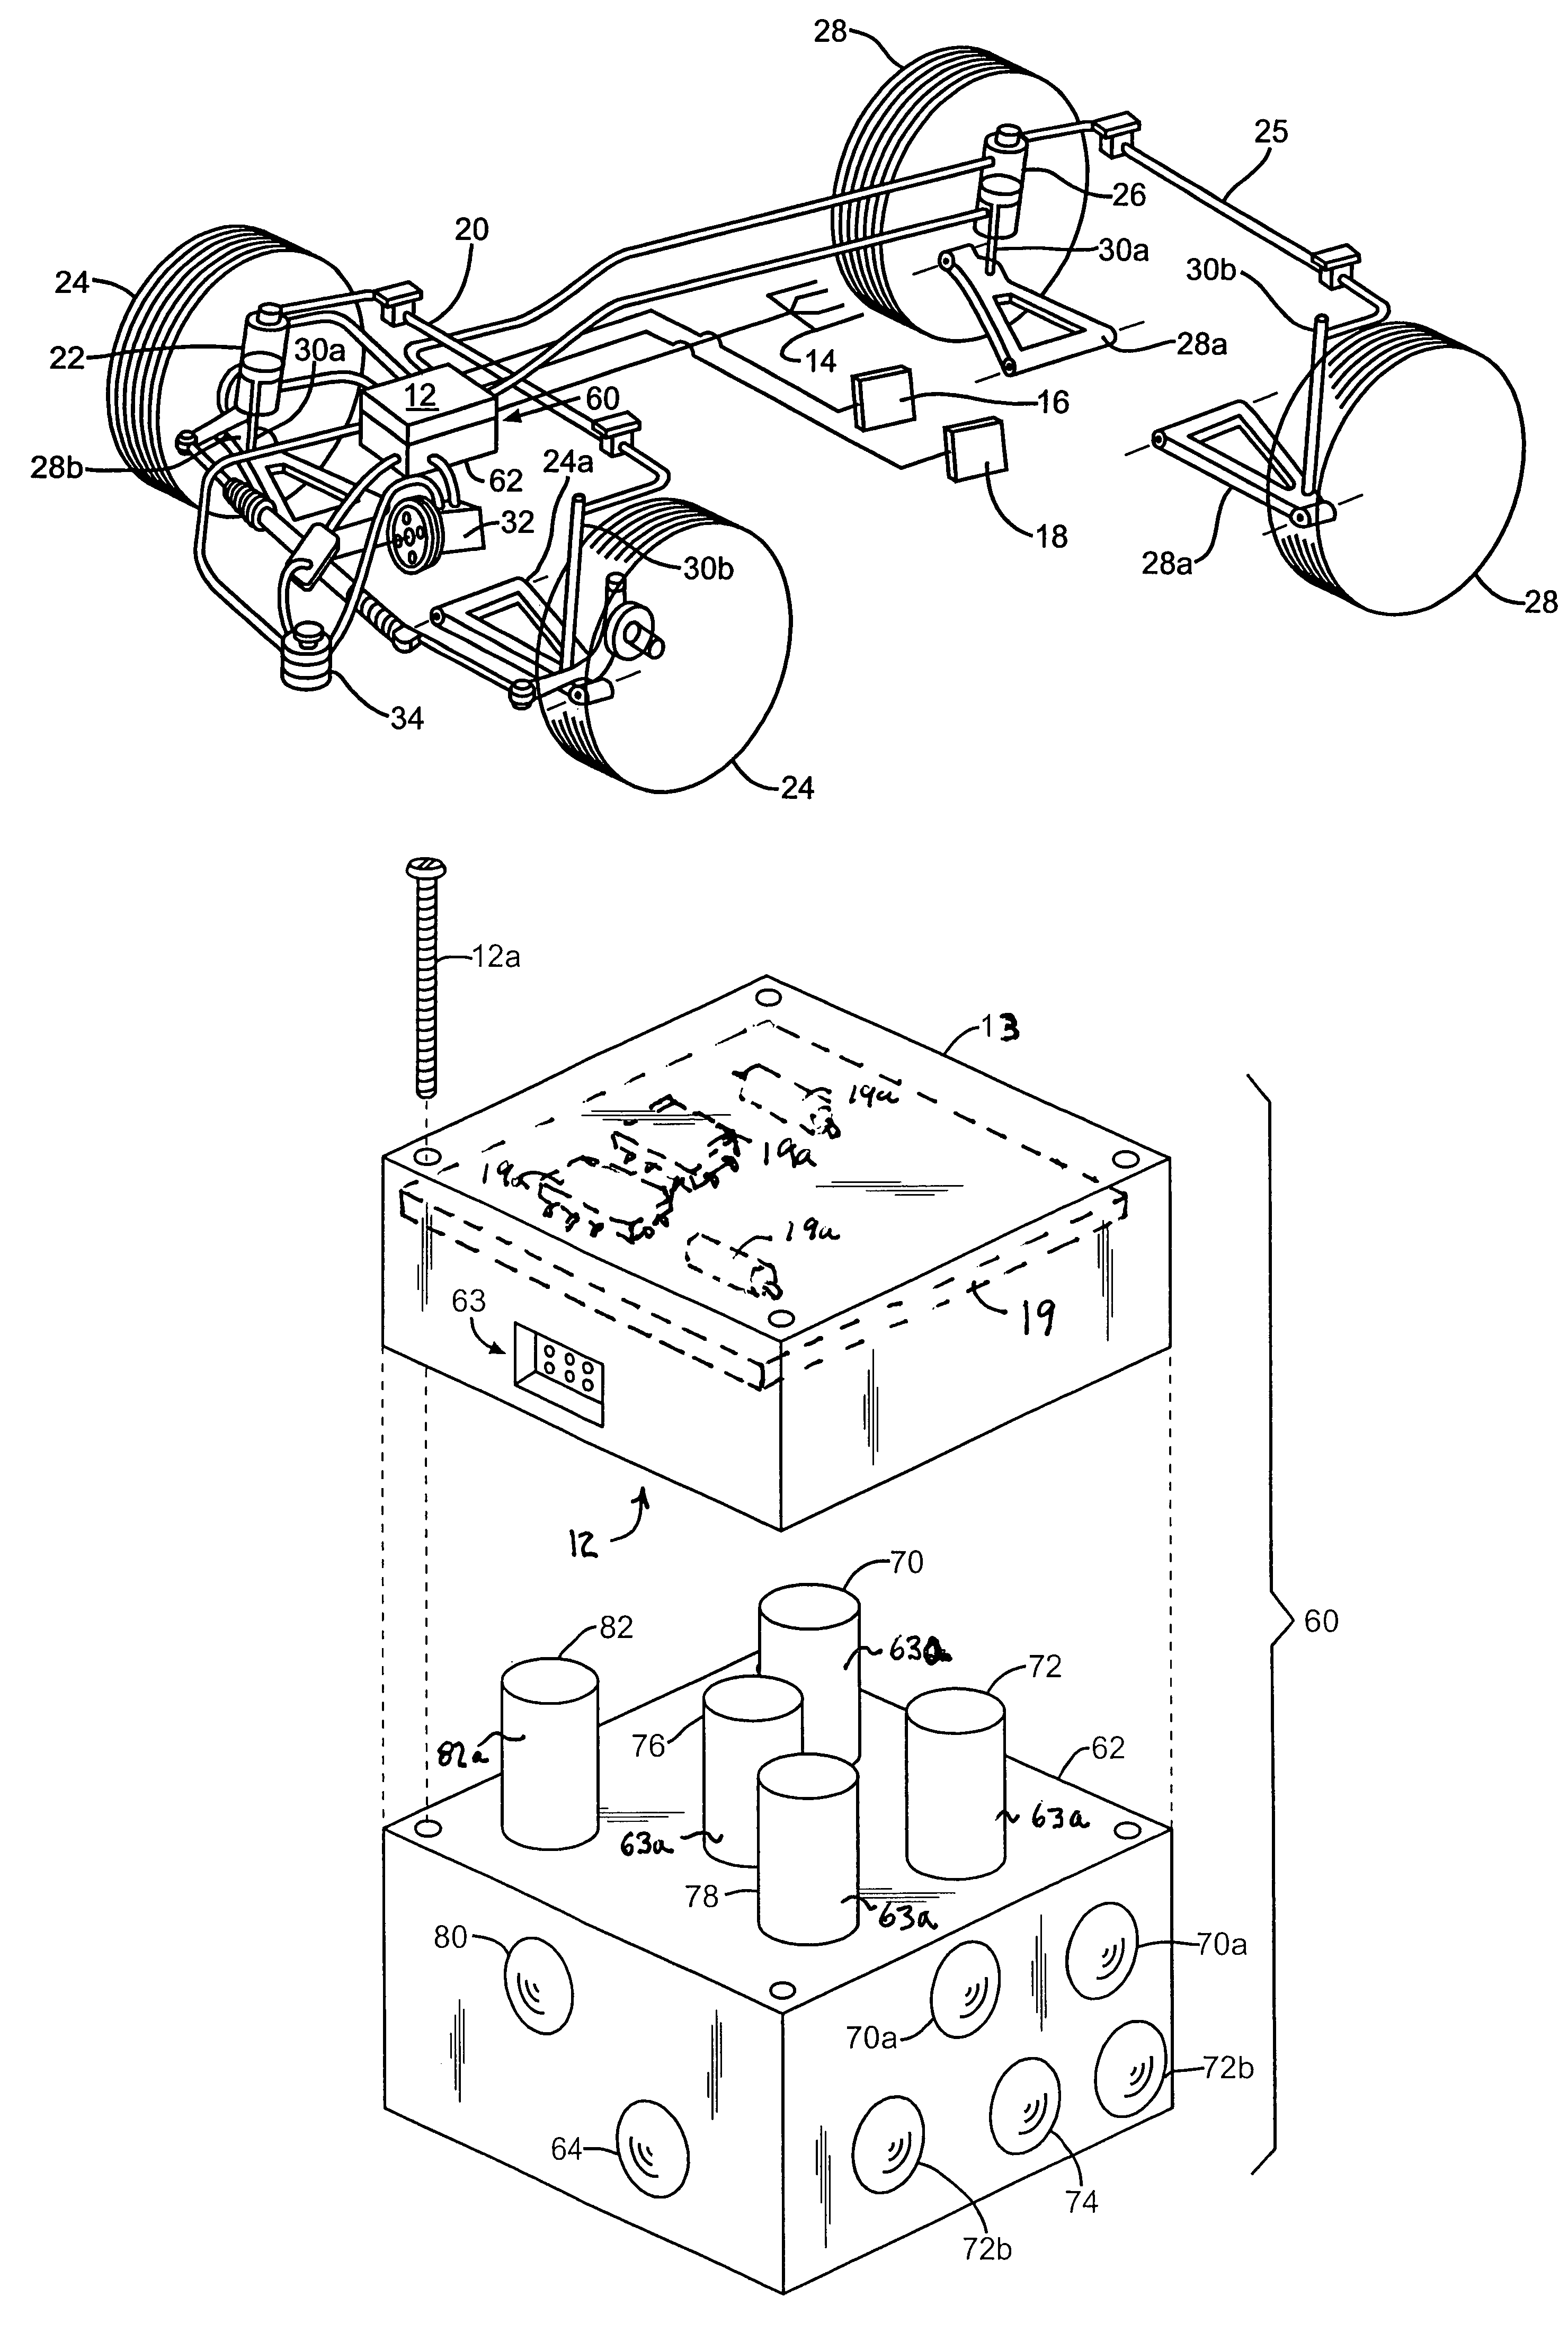 Integrated control unit for an active roll control system for a vehicle suspension system